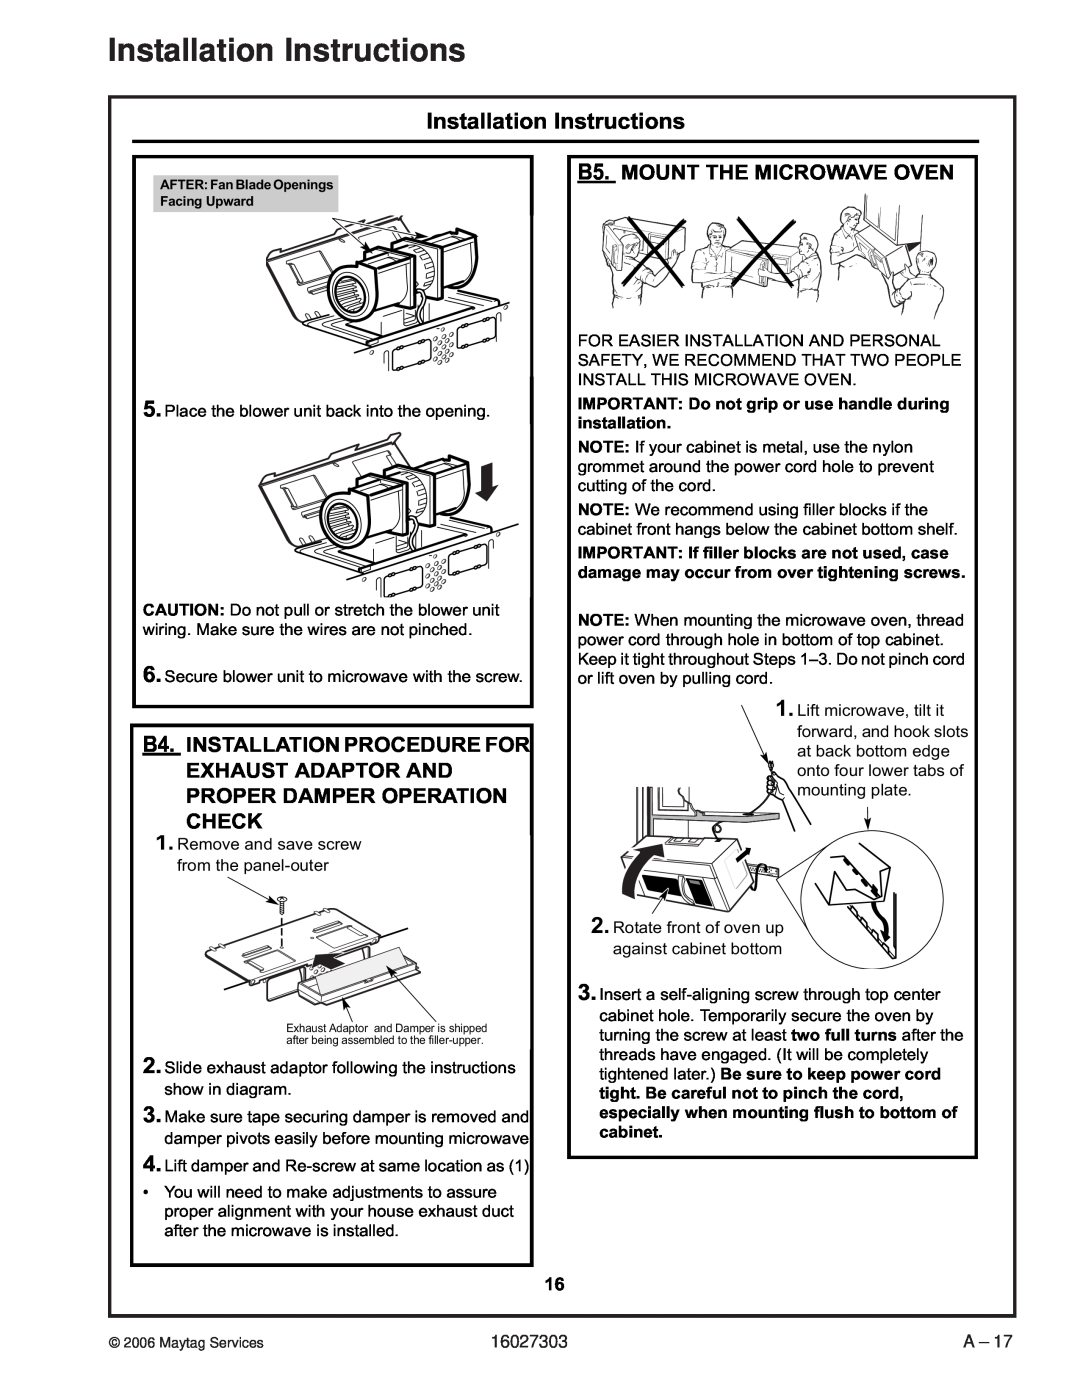 Maytag UMV1152CA manual B5.MOUNT THE MICROWAVE OVEN, Installation Instructions 